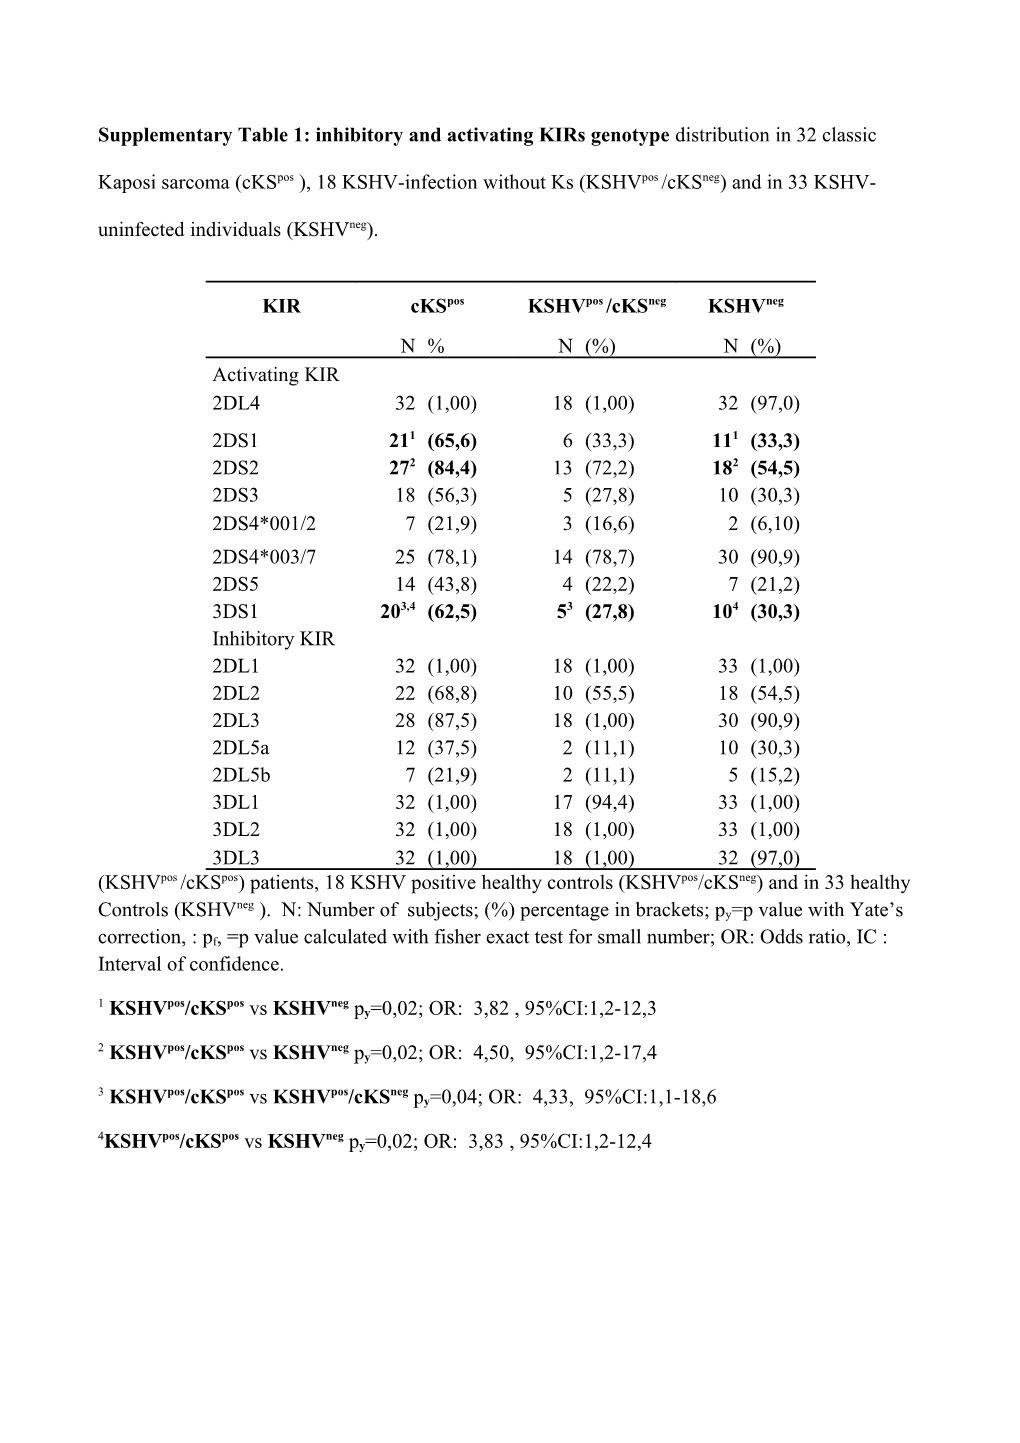 Supplementary Table 1: Inhibitory and Activating Kirs Genotype Distribution in 32 Classic